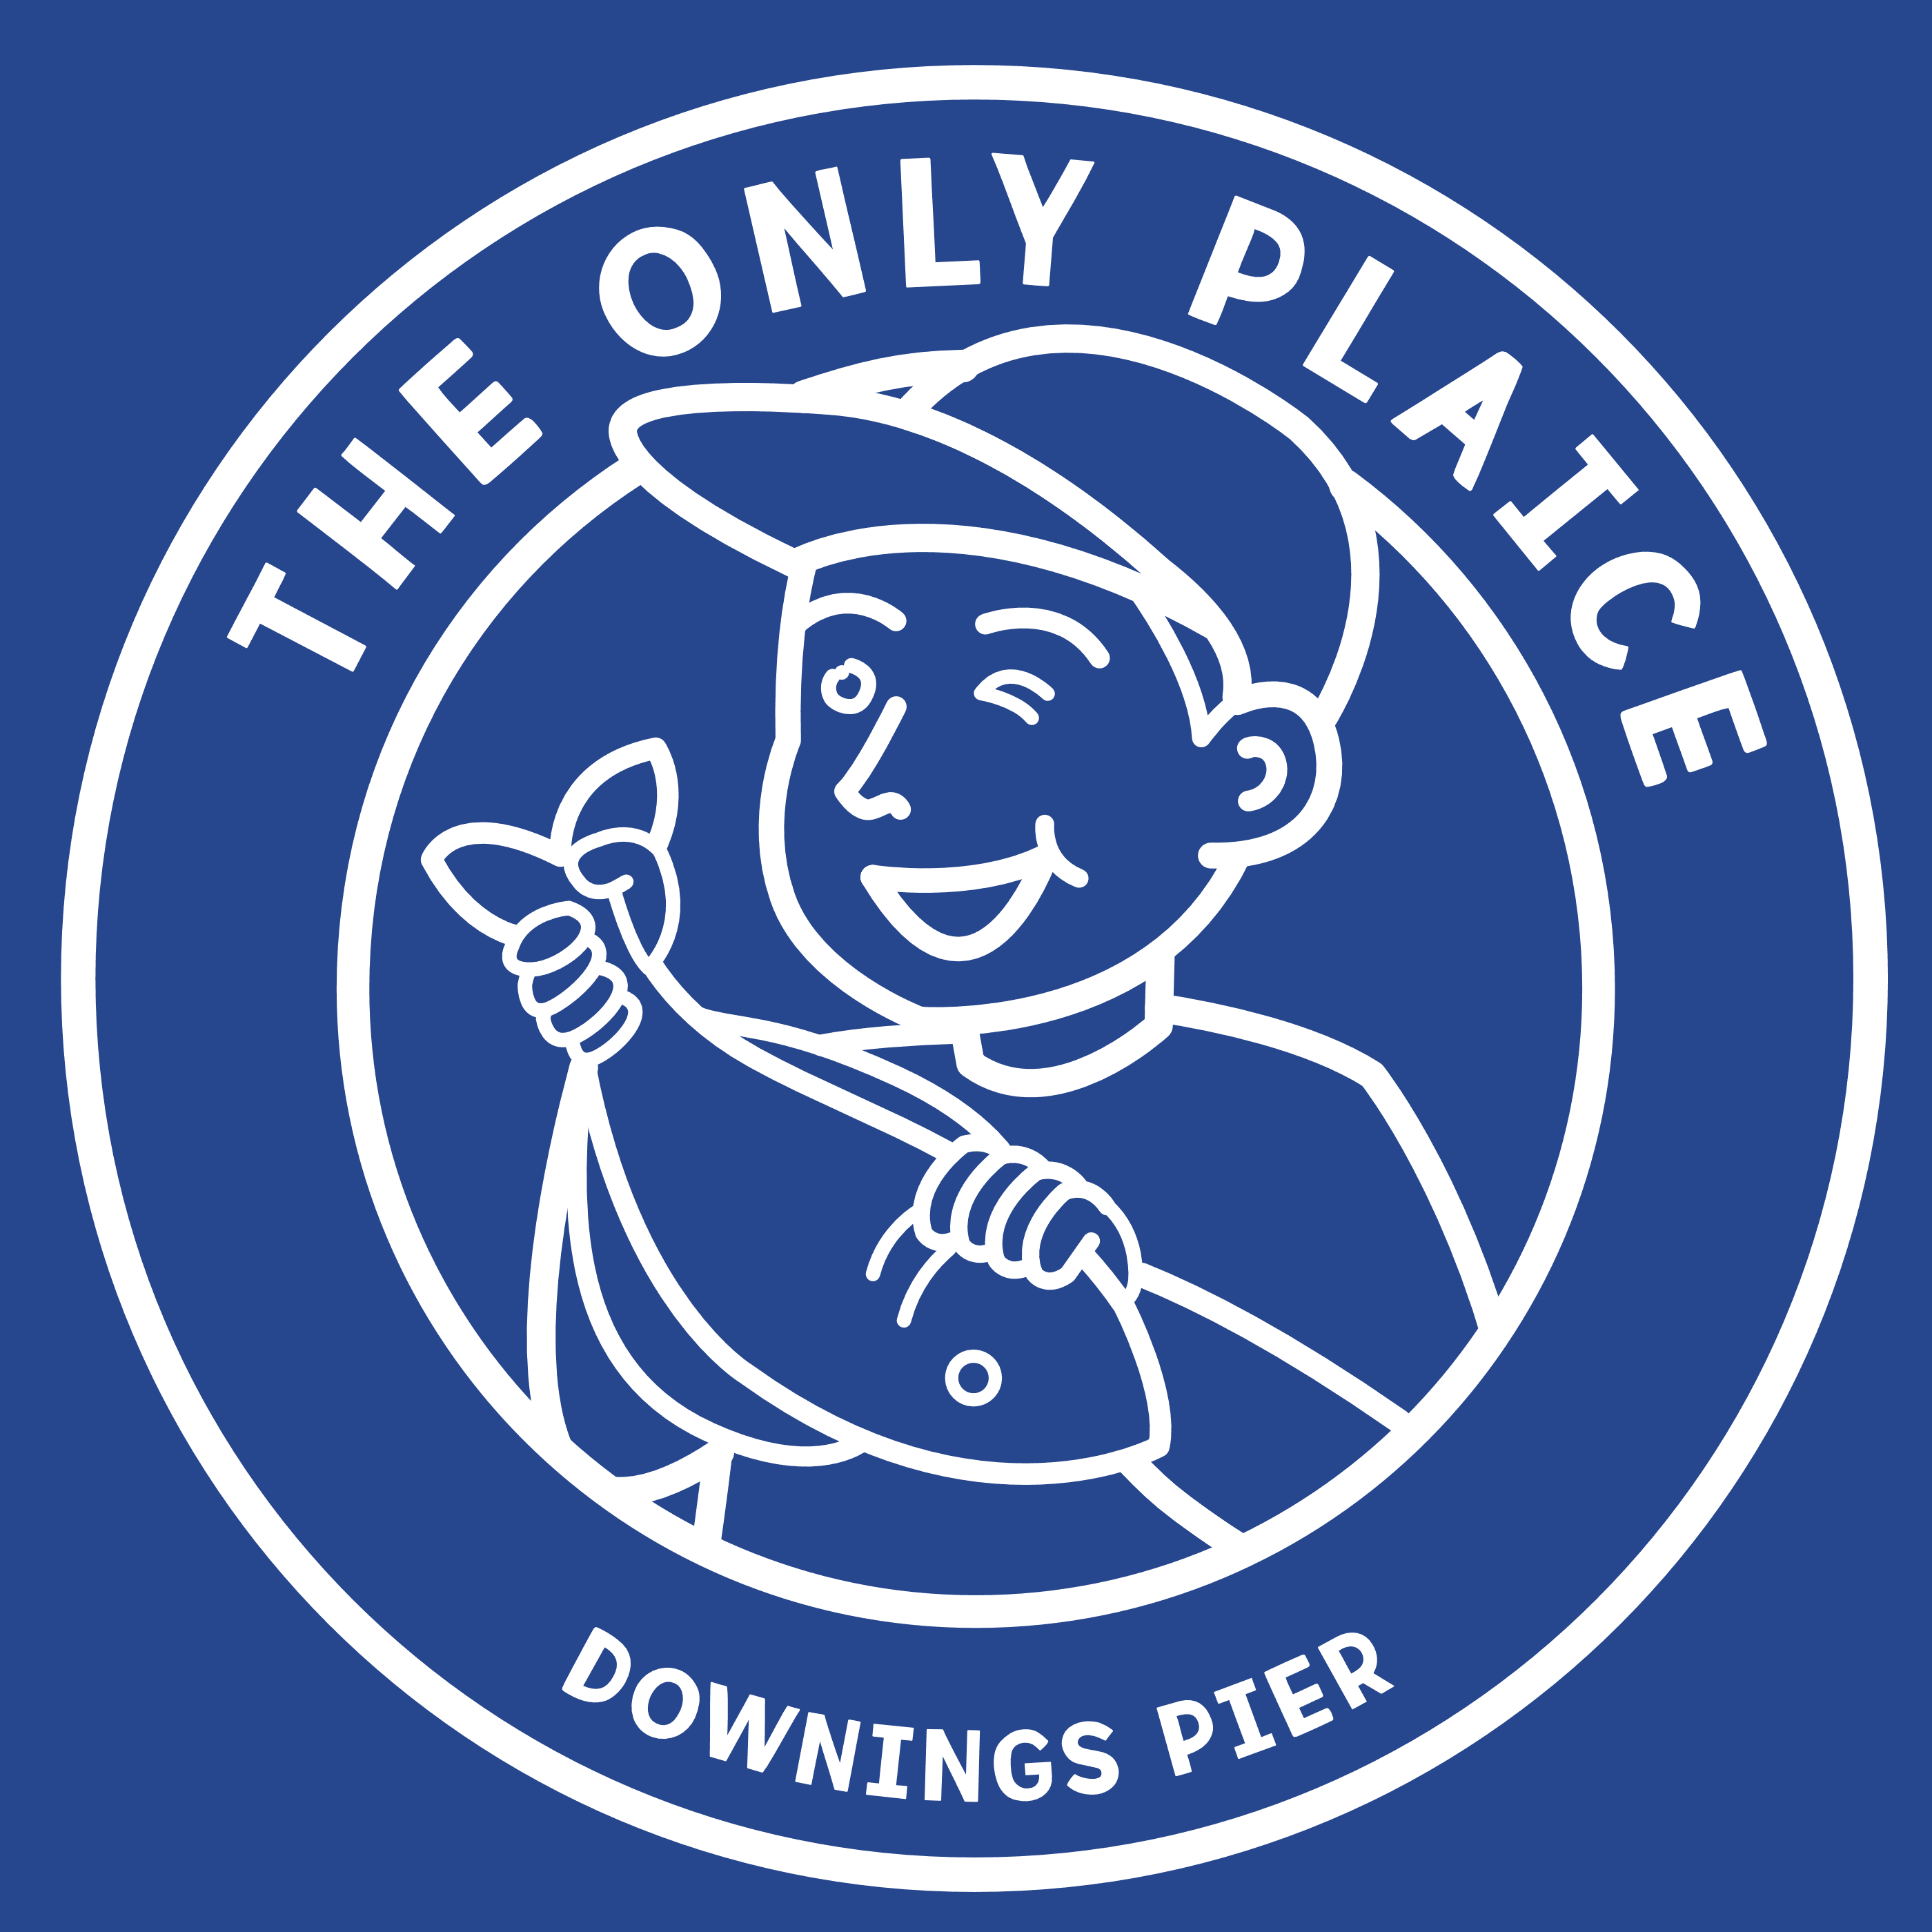 Image The Only Plaice Logo